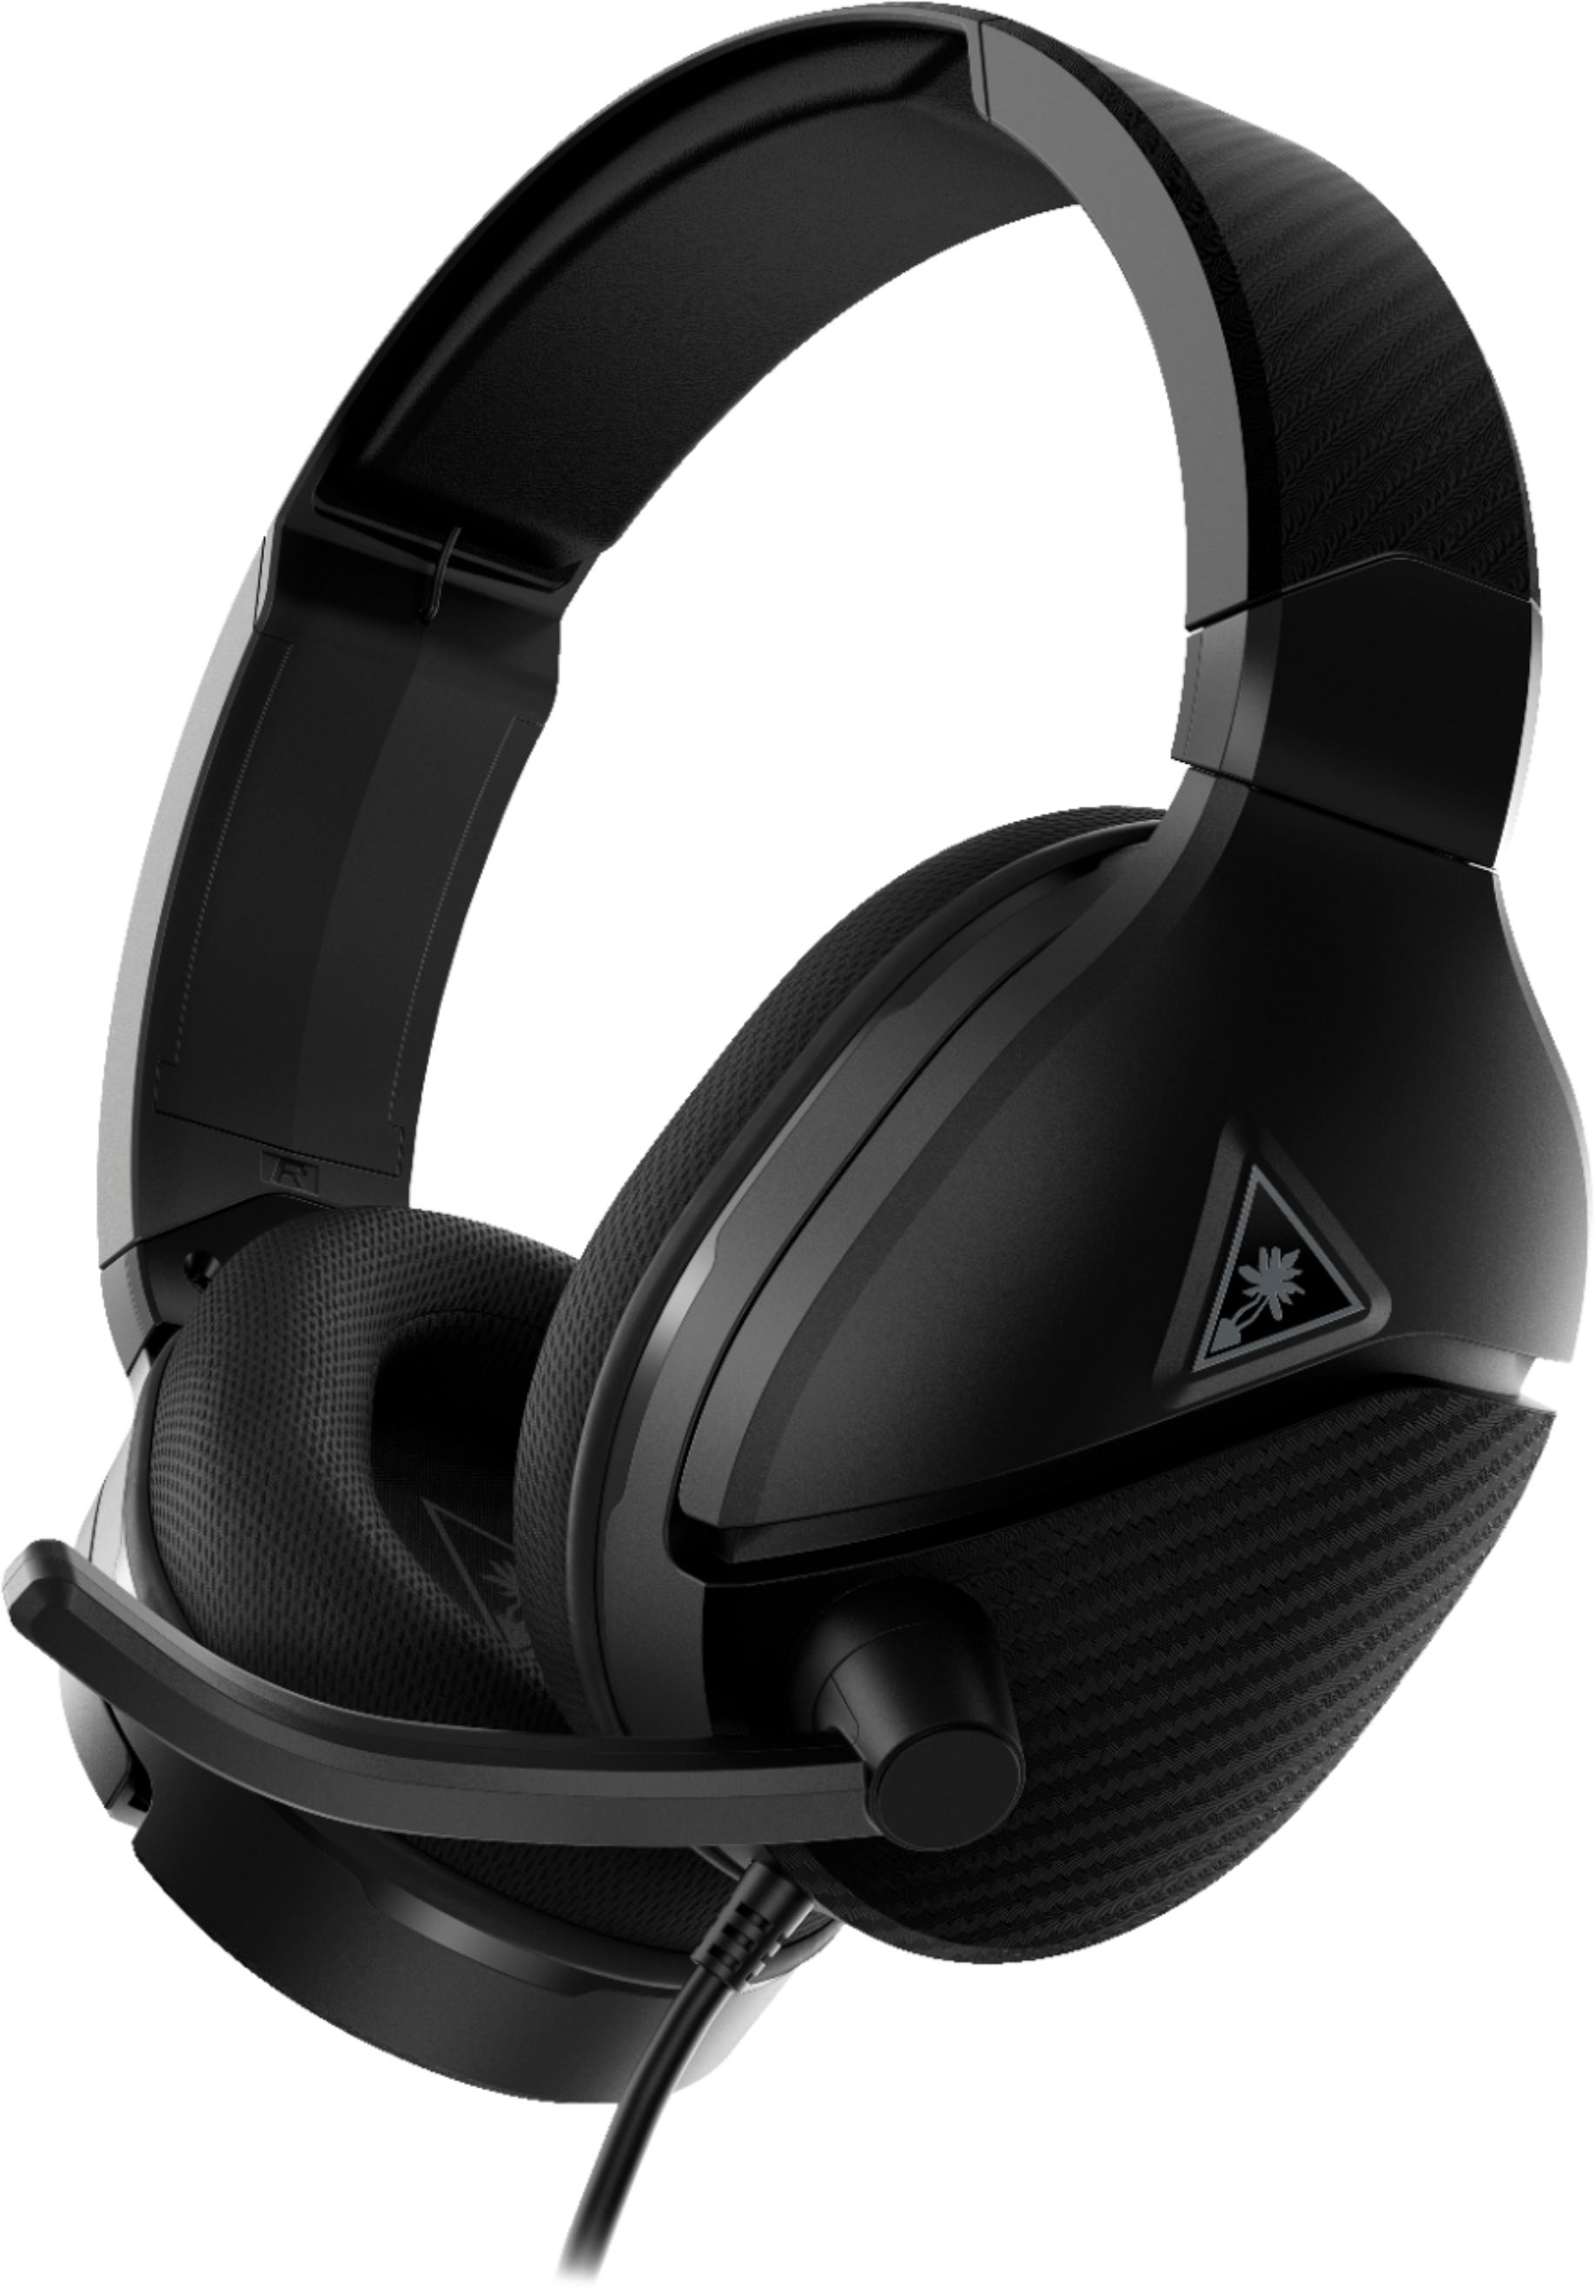 Turtle Beach Recon 200 Gen 2 Powered Gaming Headset for Xbox One